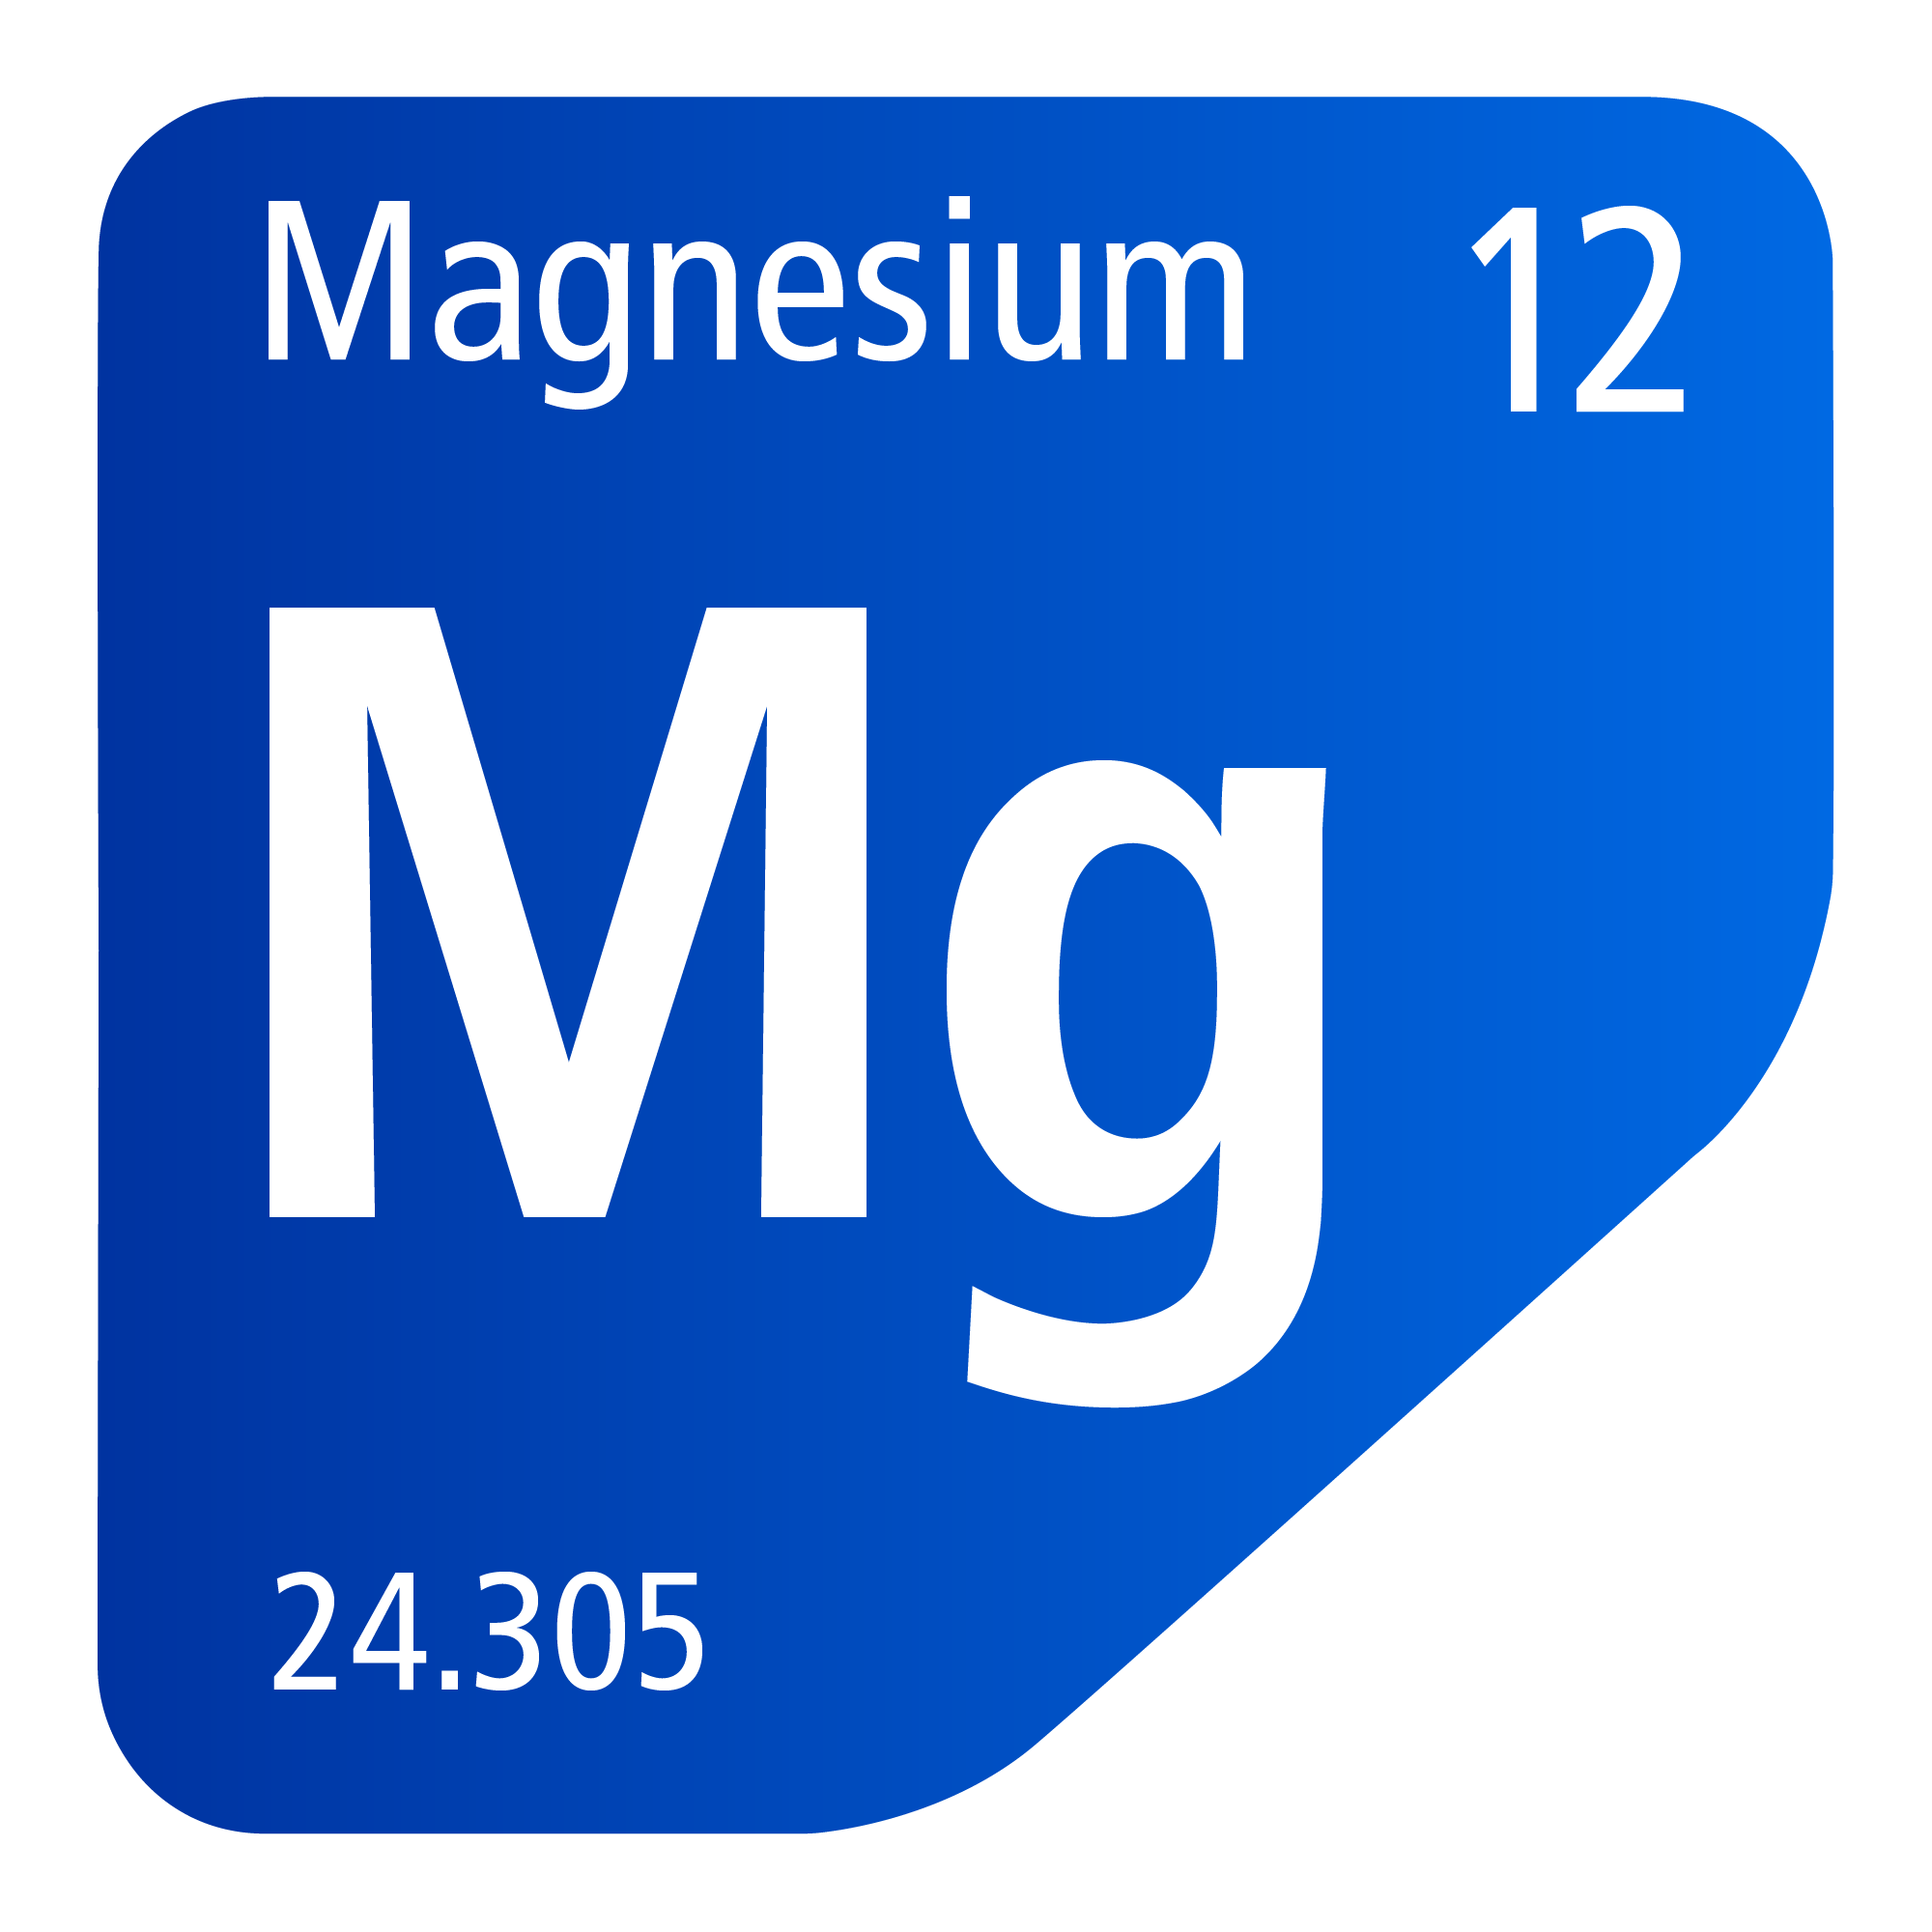 List of Behansar products in Magnesium category